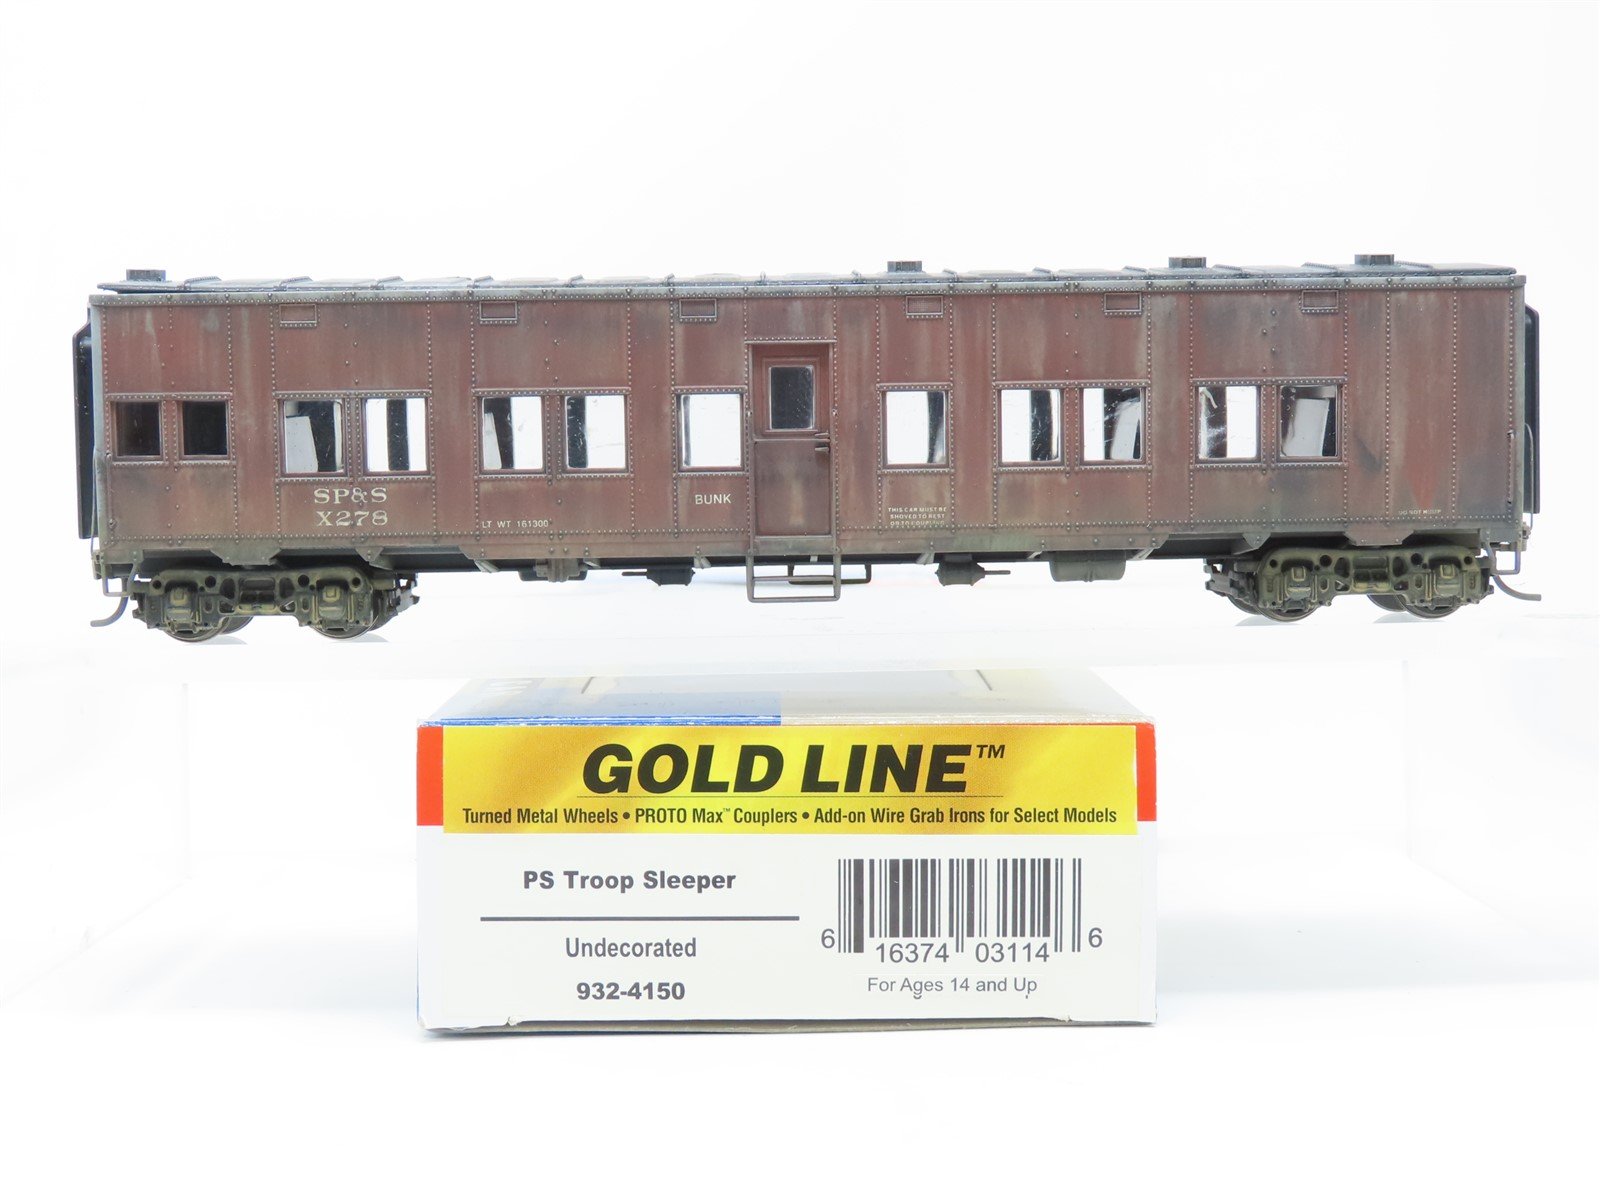 HO Scale Walthers Gold Line 932-4150 SP&S Bunk Passenger Car #X278 - Pro Custom